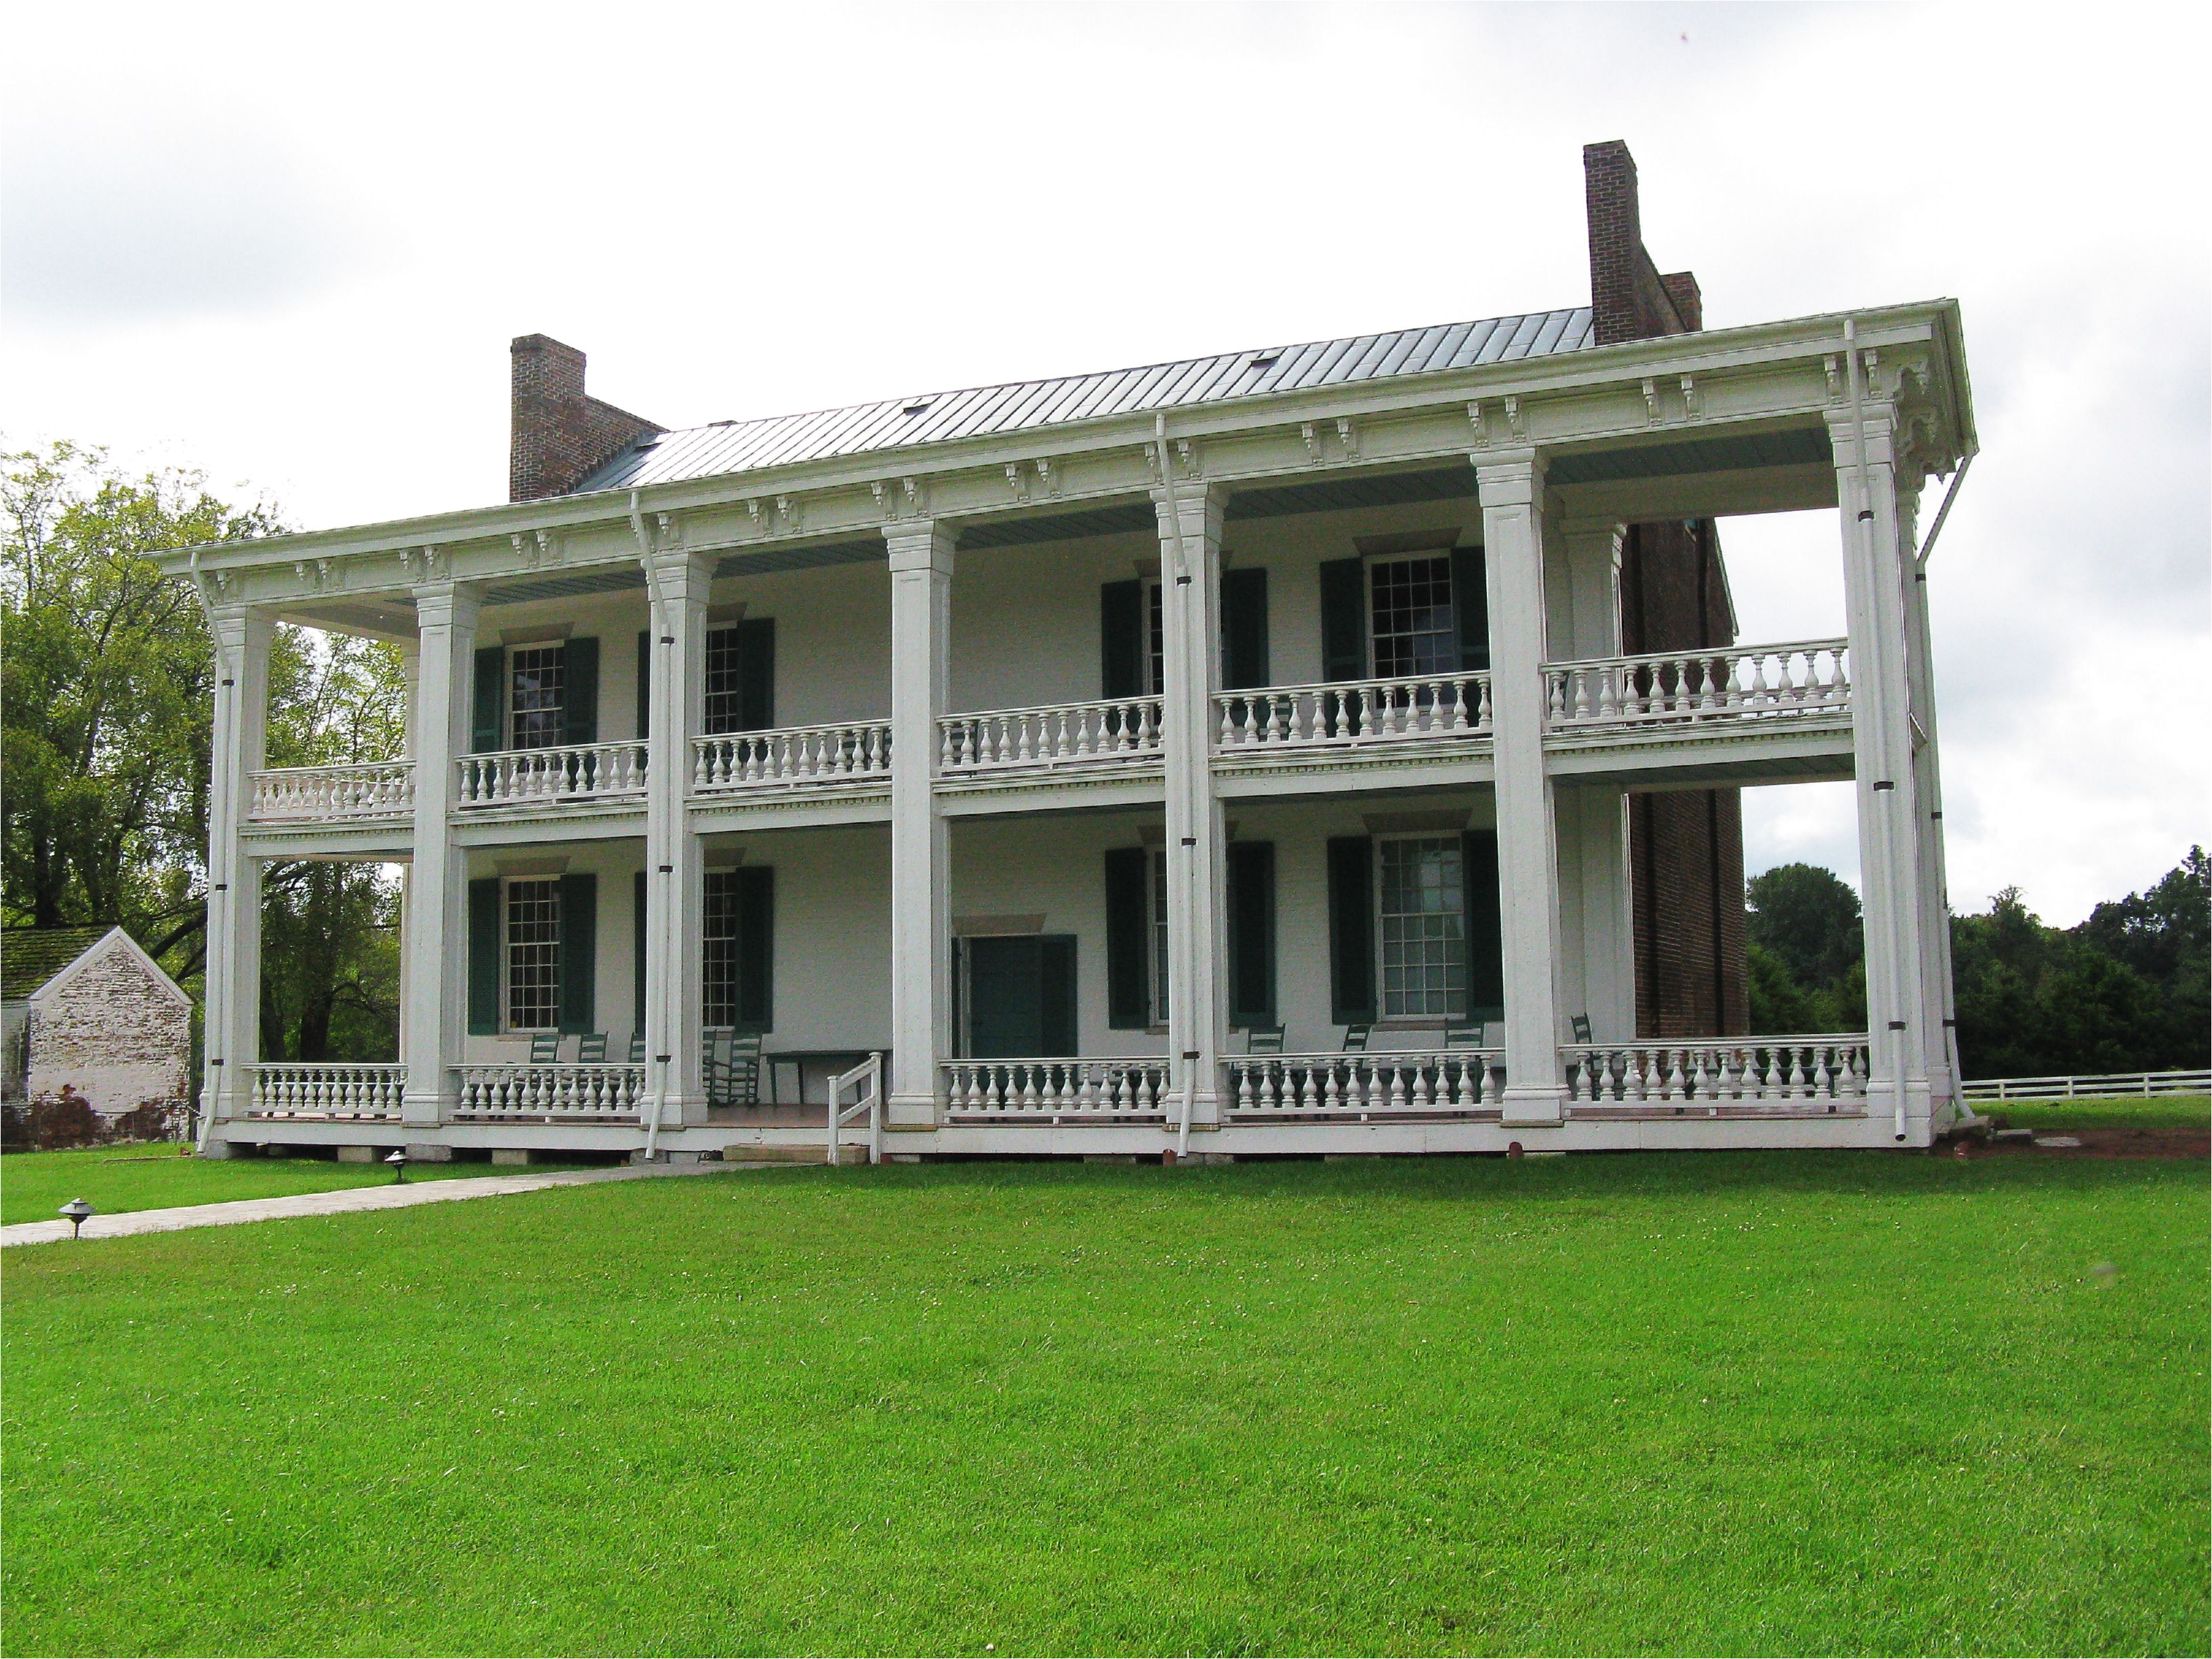 Blythewood Bed and Breakfast Columbia Tn Tennessee Carnton Historic Plantation House In Franklin Williamson